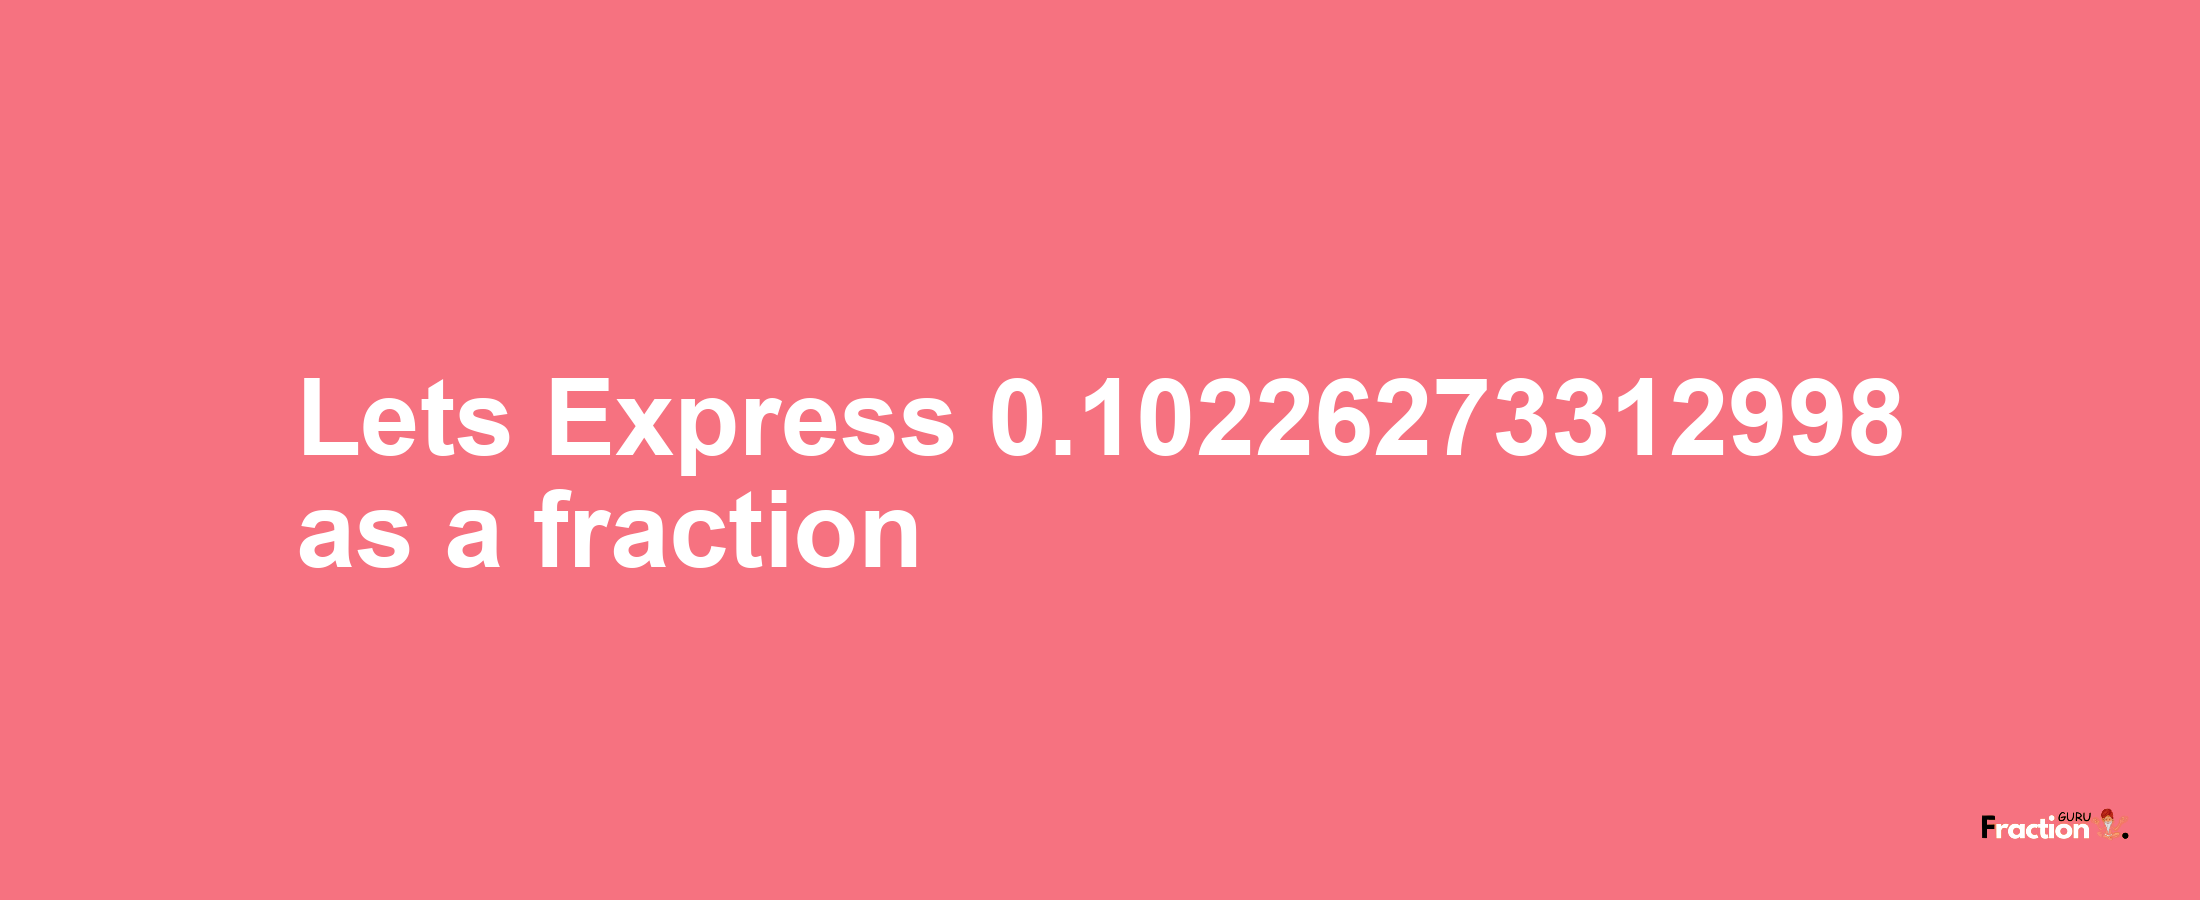 Lets Express 0.10226273312998 as afraction